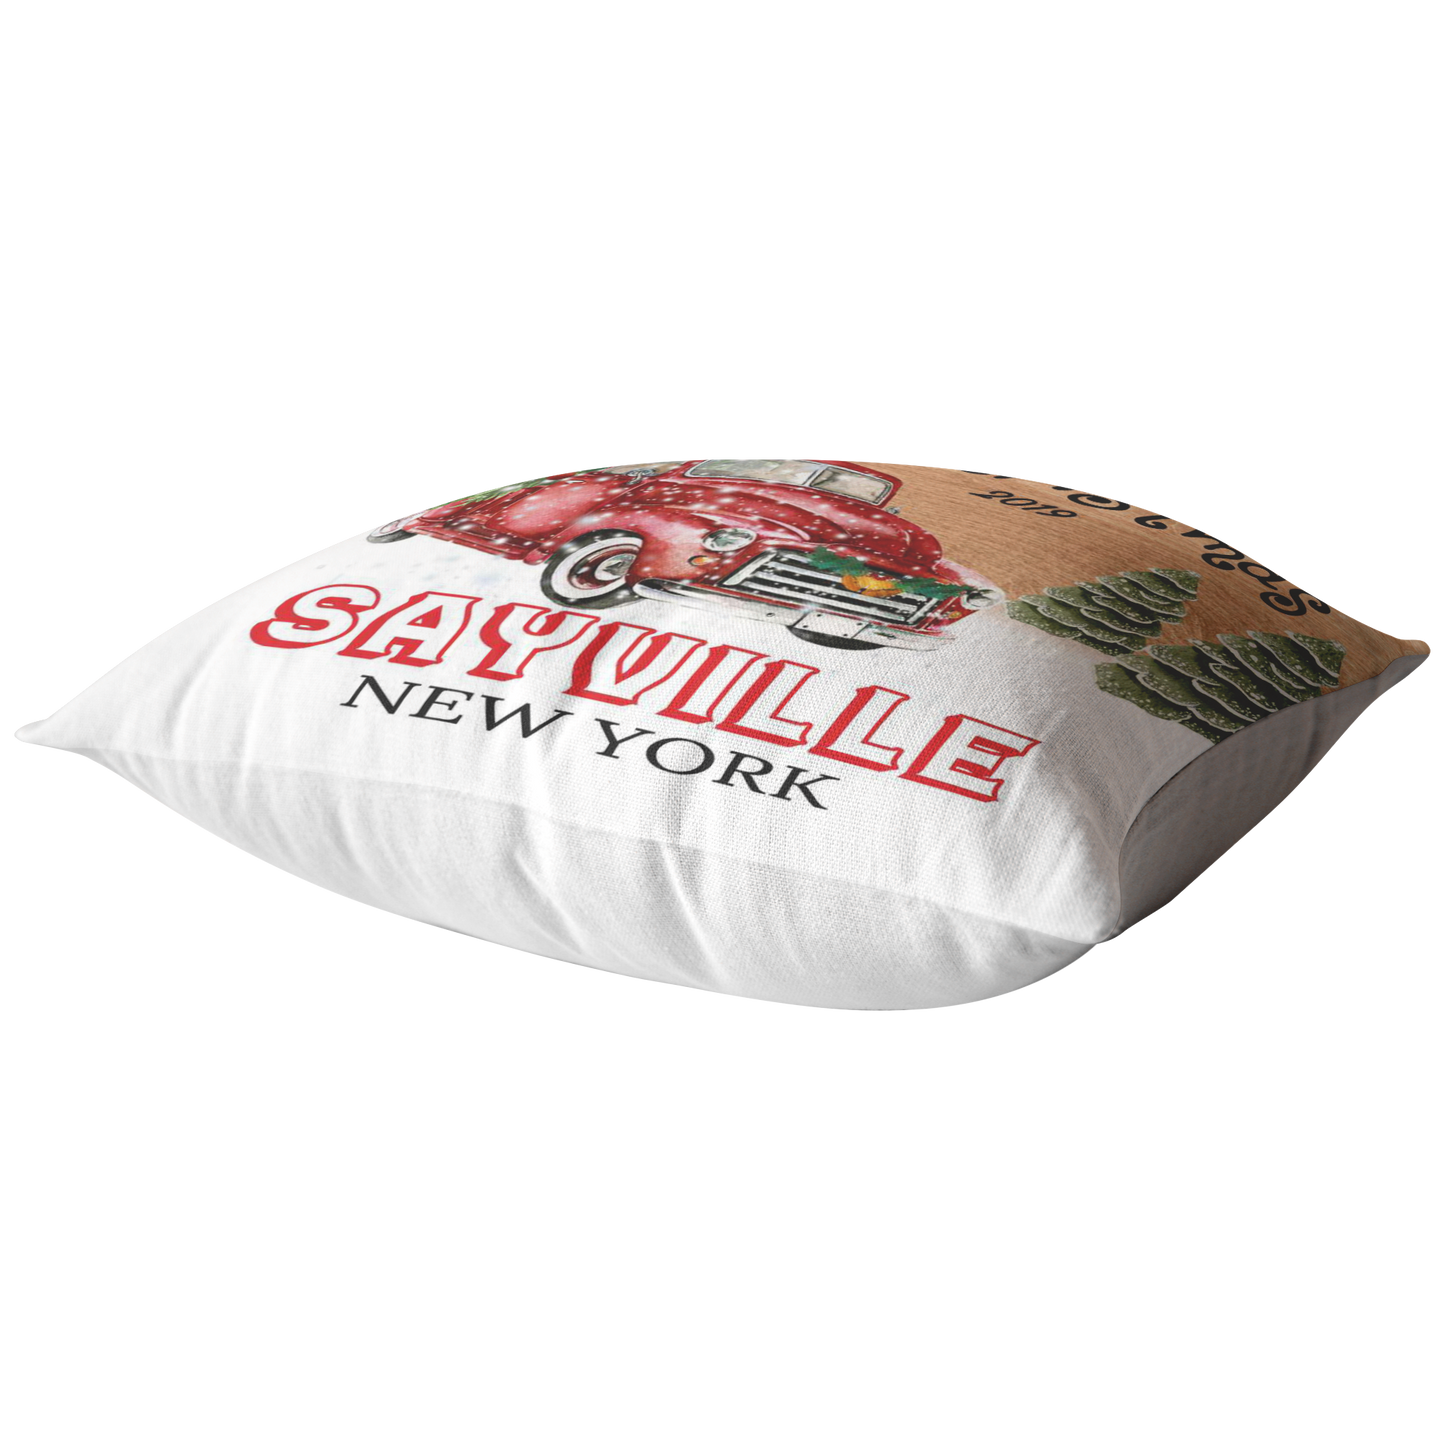 PL-20885543-sp-20336 - Merry Christmas Sayville New York NY State 2019 - Home Decor